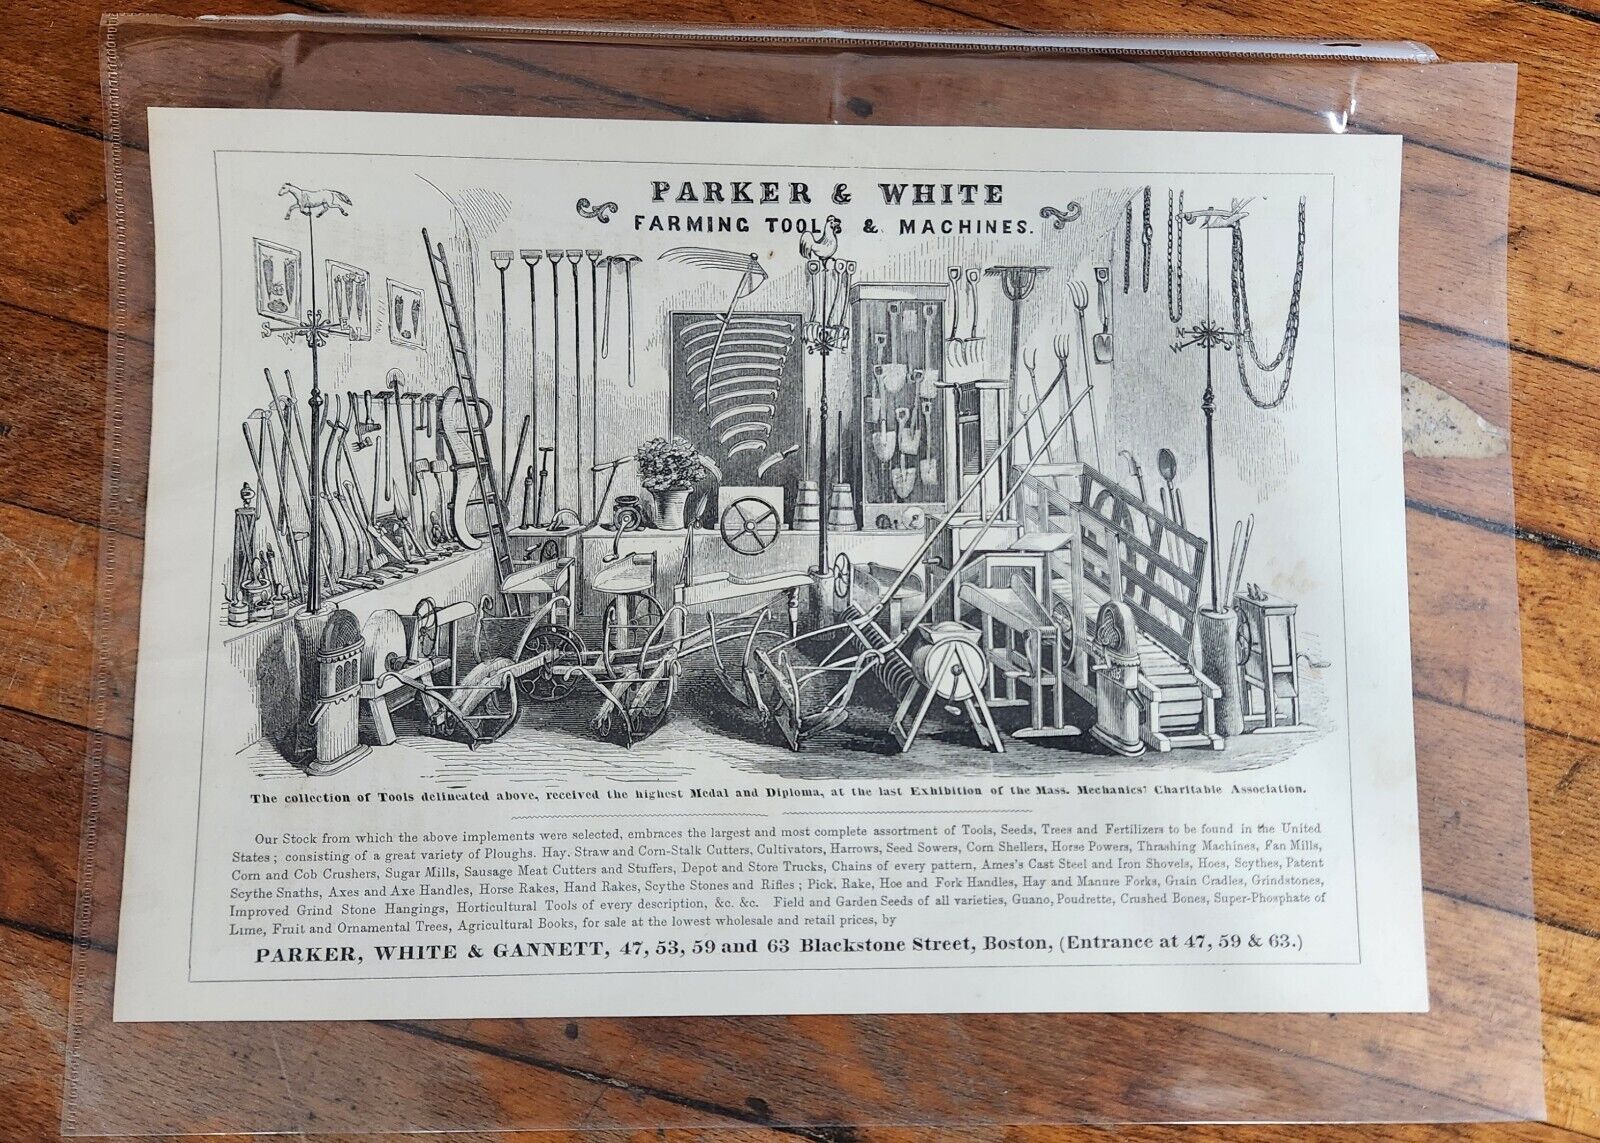 Early Parker & White Farming Tools & Machines Boston Advertising